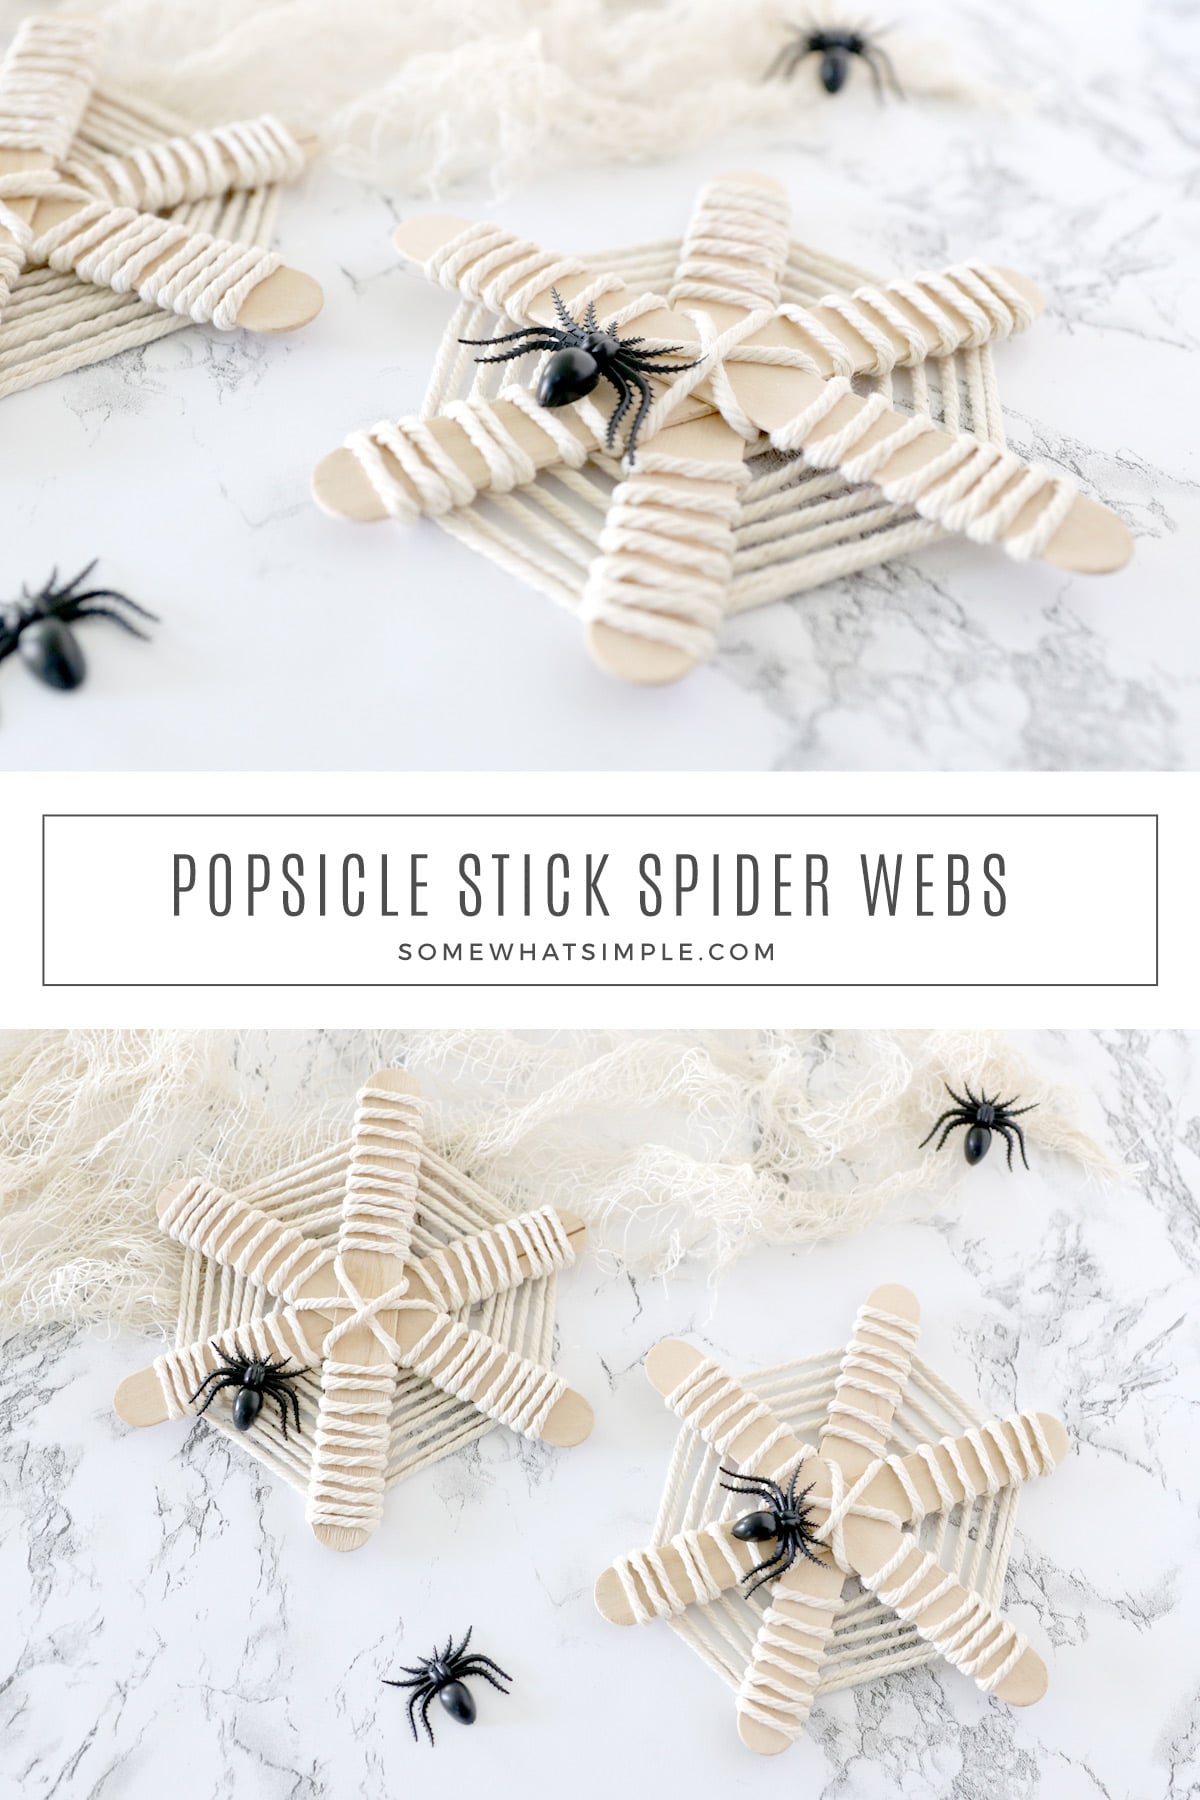 Popsicle stick spiderwebs are a great craft for a classroom Halloween party. Made with just a few simple supplies, these spider webs are adorably spooky and so simple to make! via @somewhatsimple